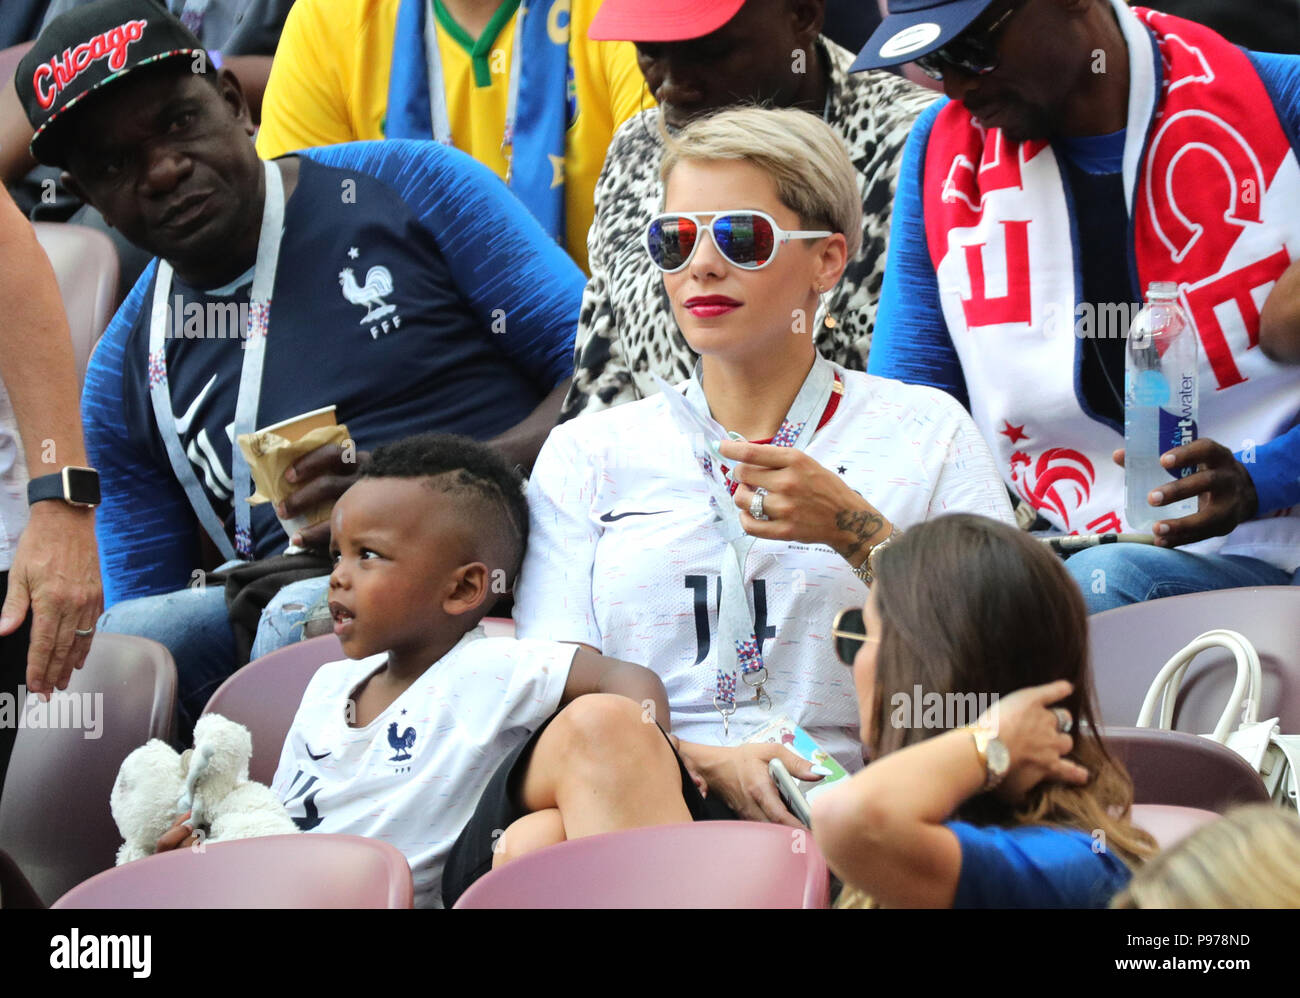 Moscow, Russia. 15th July, 2018. Soccer, World Cup 2018, Final game, France  vs. Croatia at the Luzhniki Stadium. Isabelle Matuidi, wife of Blaise  Matuidi from France, in the stands prior to the